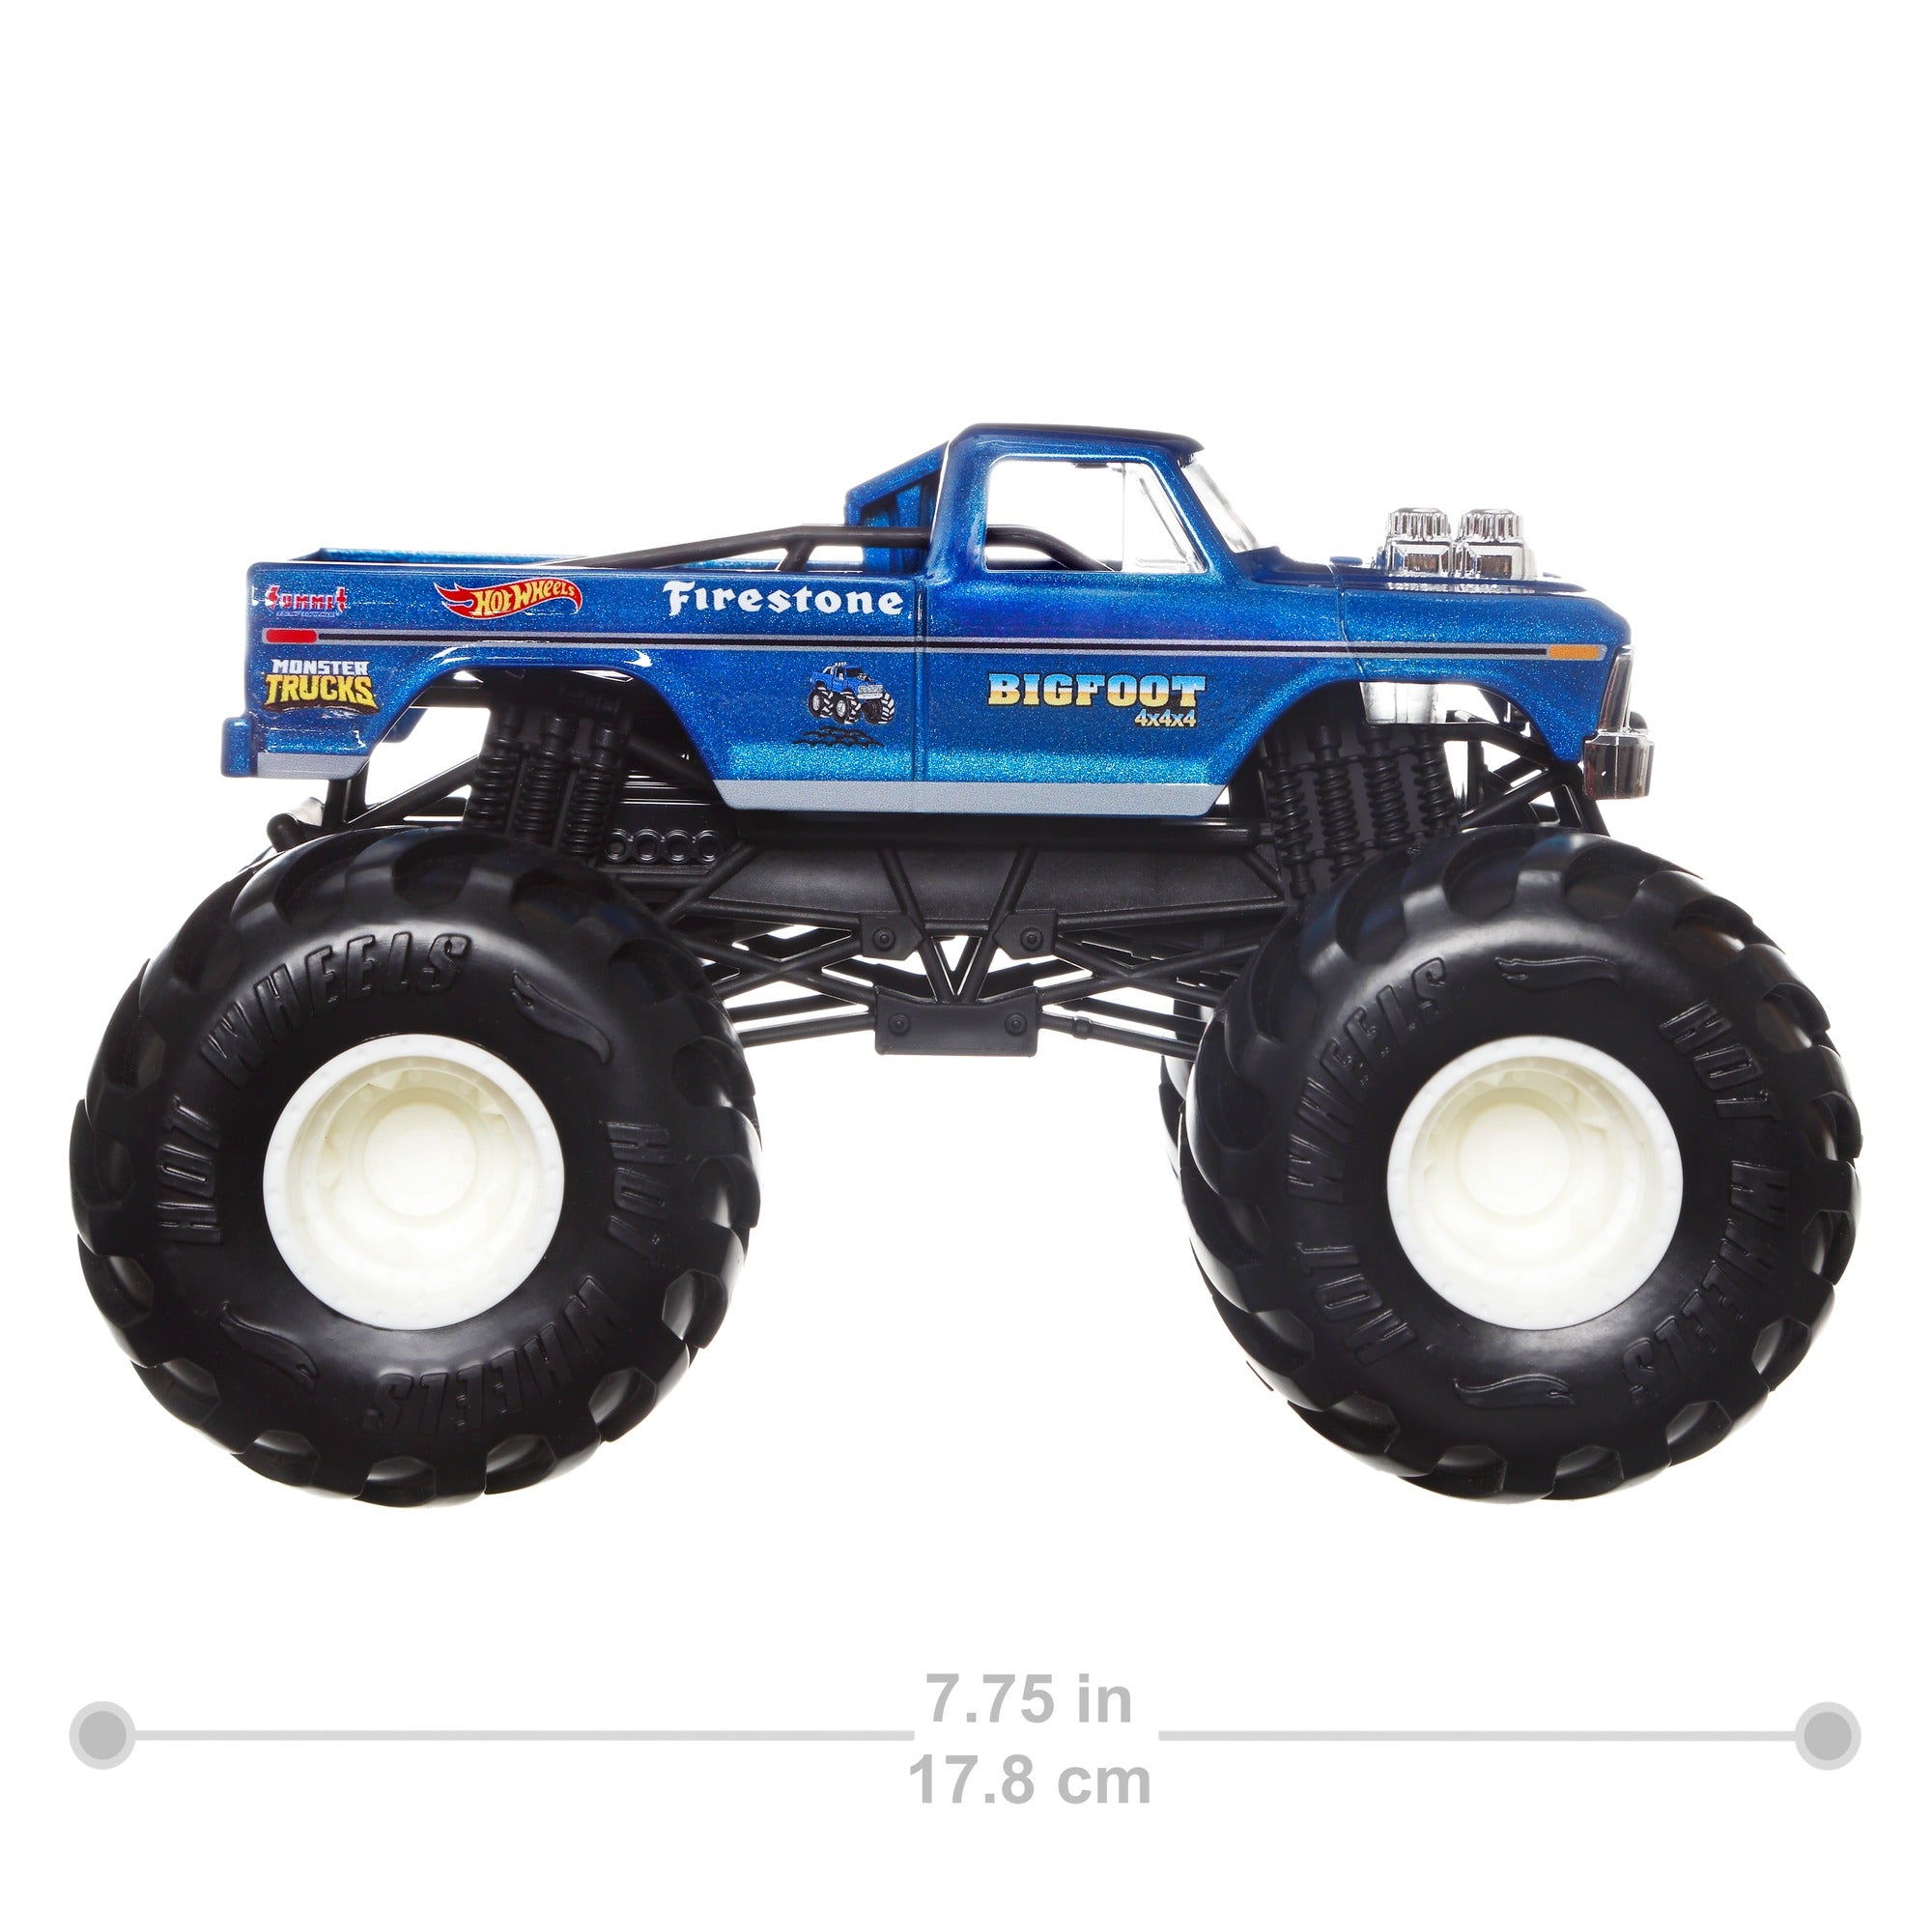 Hot Wheels 1:24 Scale Oversized Monster Truck Big Foot 4x4x4 Die-Cast Toy Truck with Giant Wheels and Cool Designs